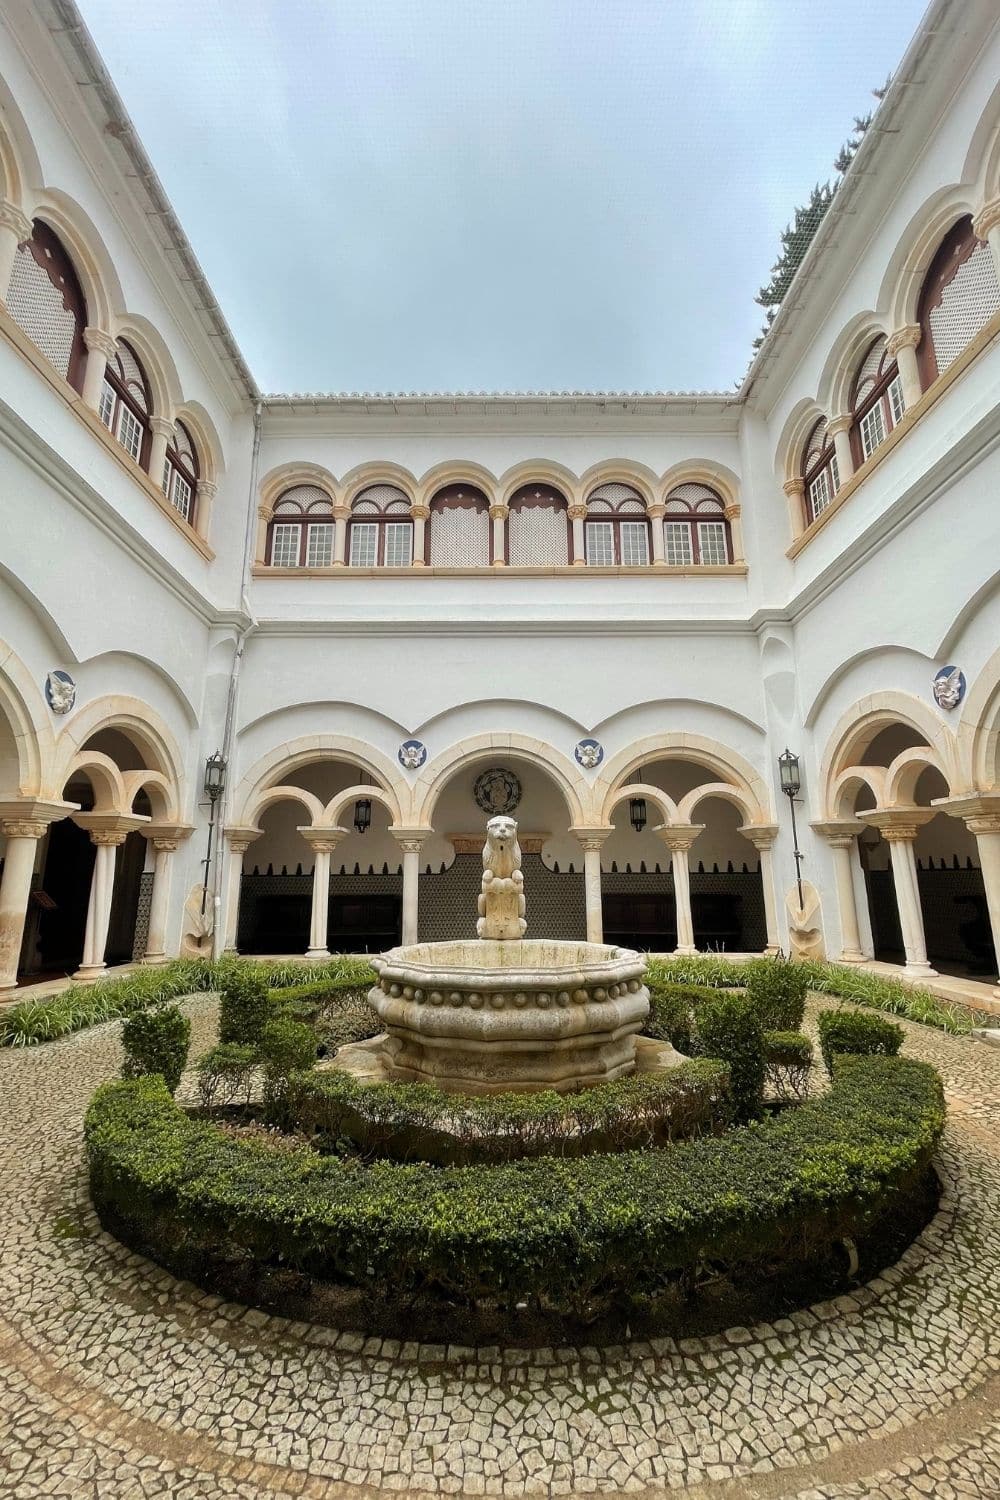 Elegant courtyard inside a historical building with a two-tiered fountain at its center, surrounded by archways and Moorish-style columns, under an overcast sky, reflecting Portuguese architecture.